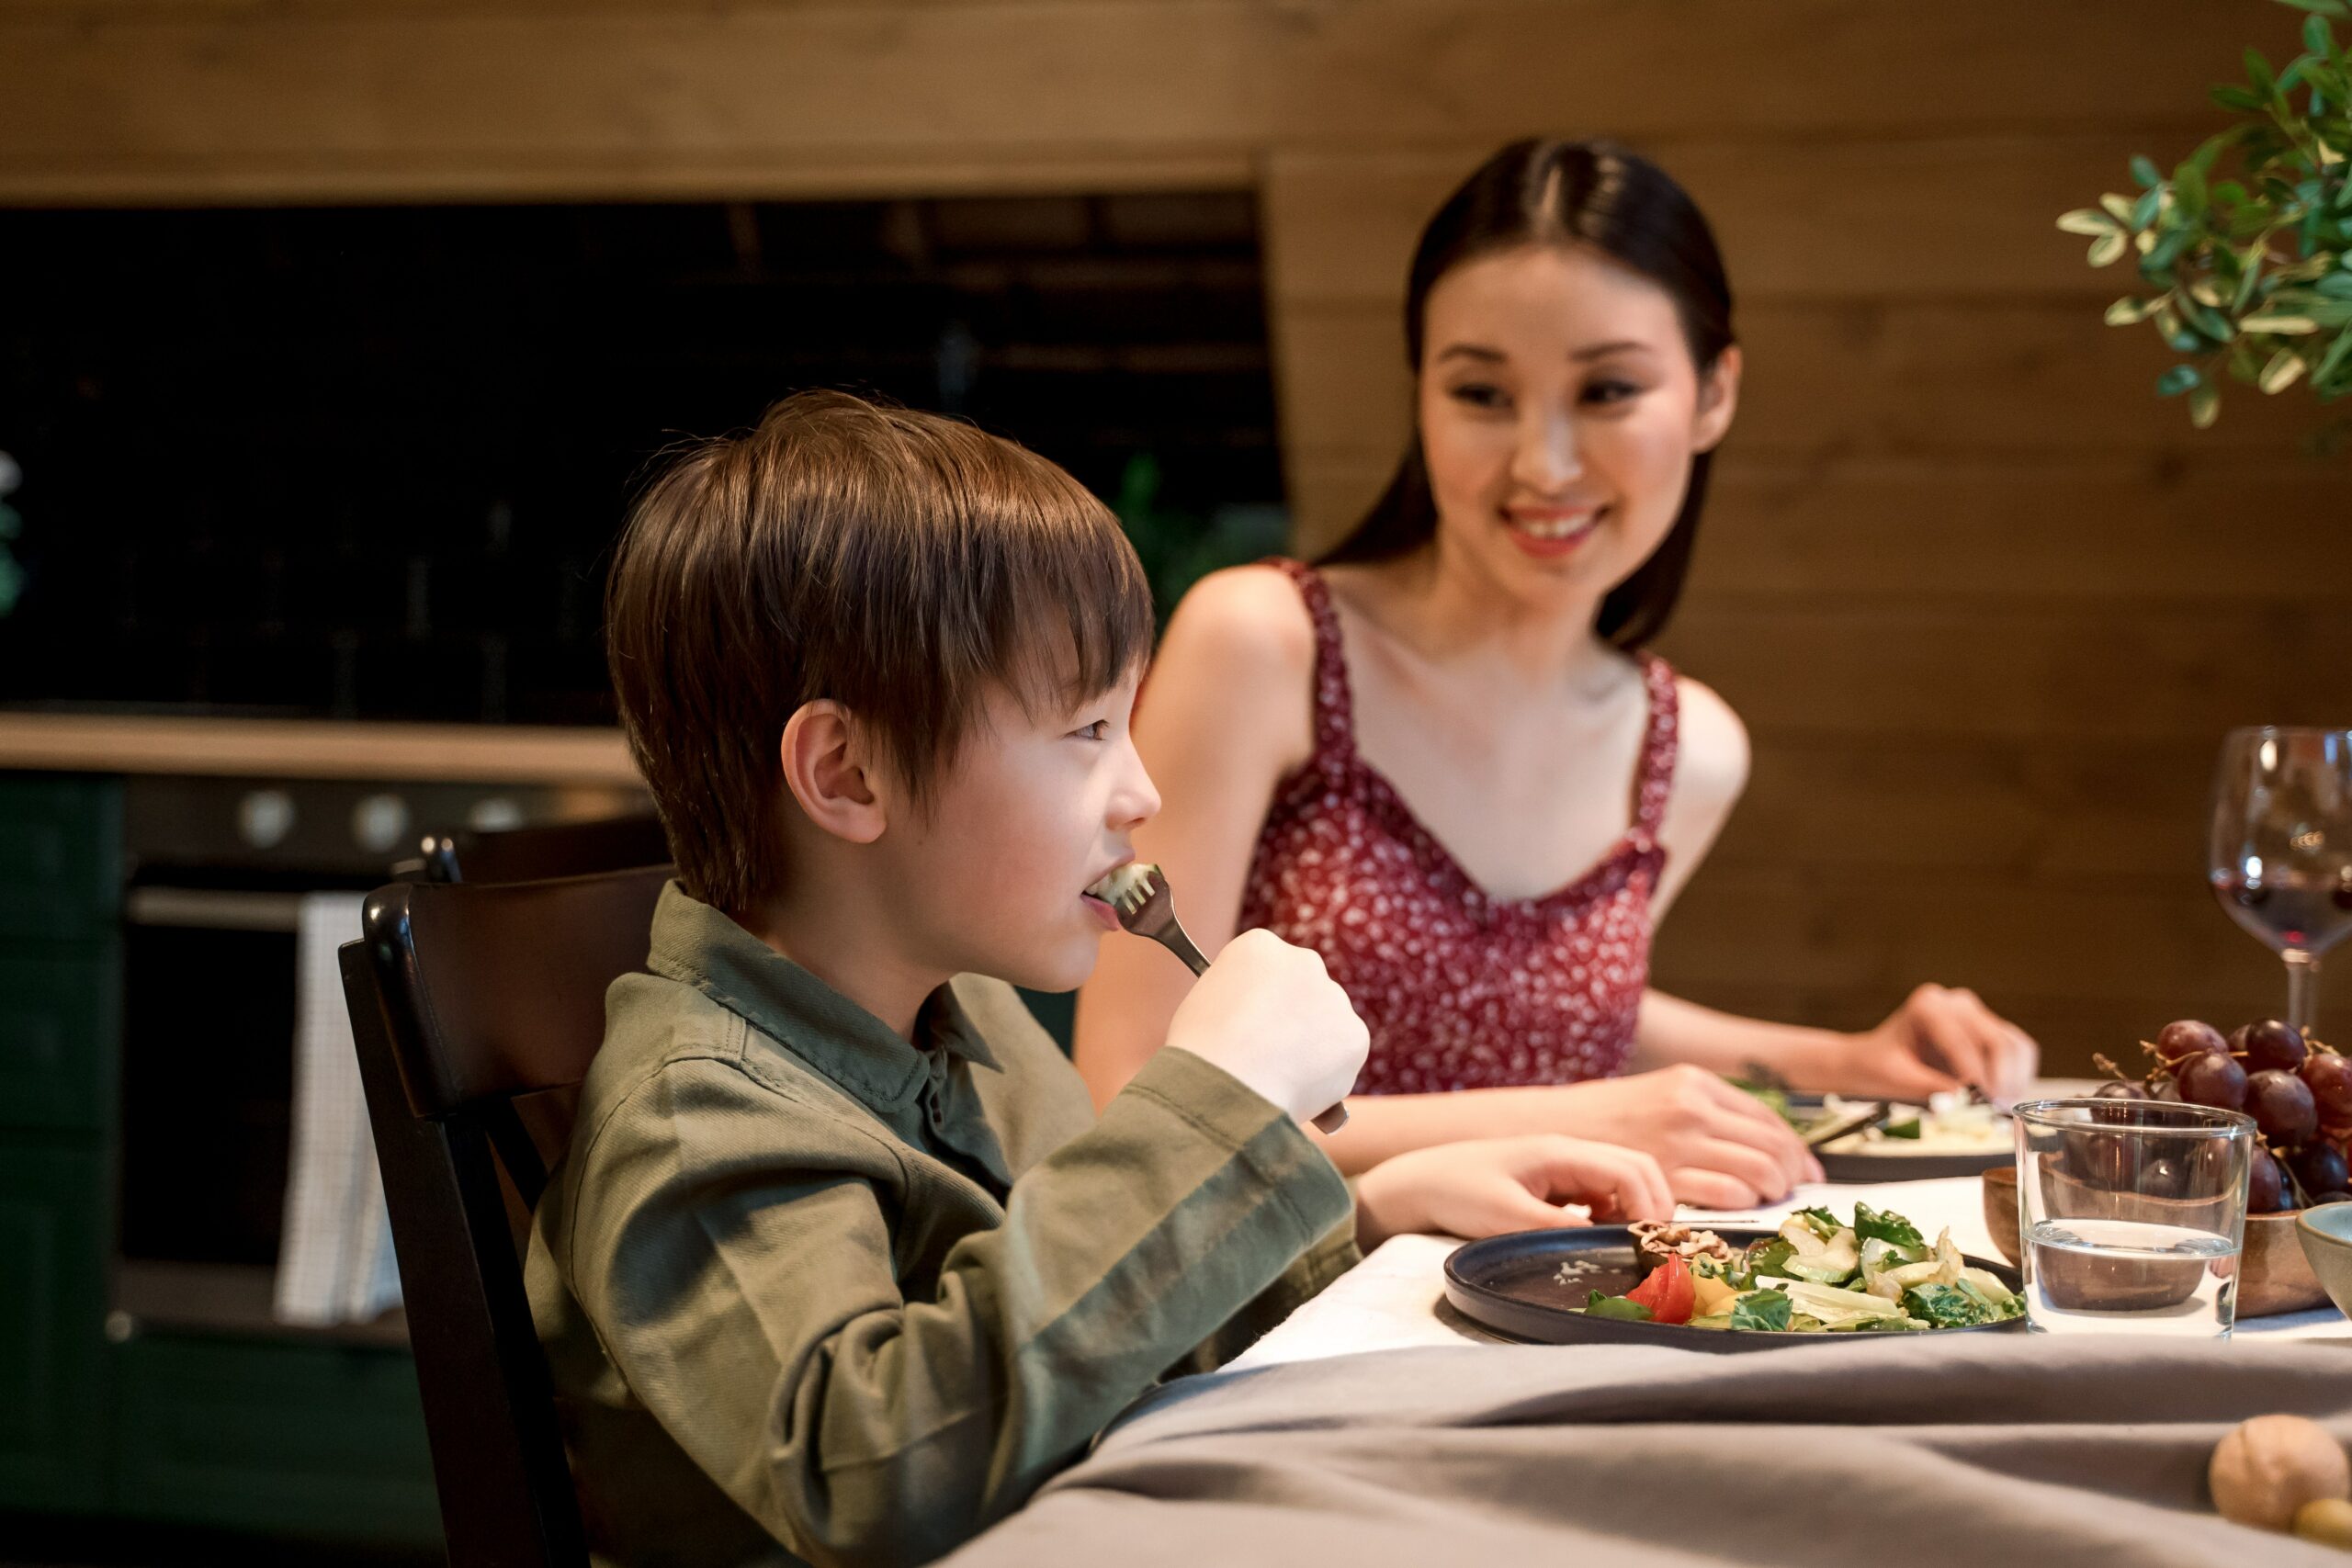 Tips to get kids to eat healthy food